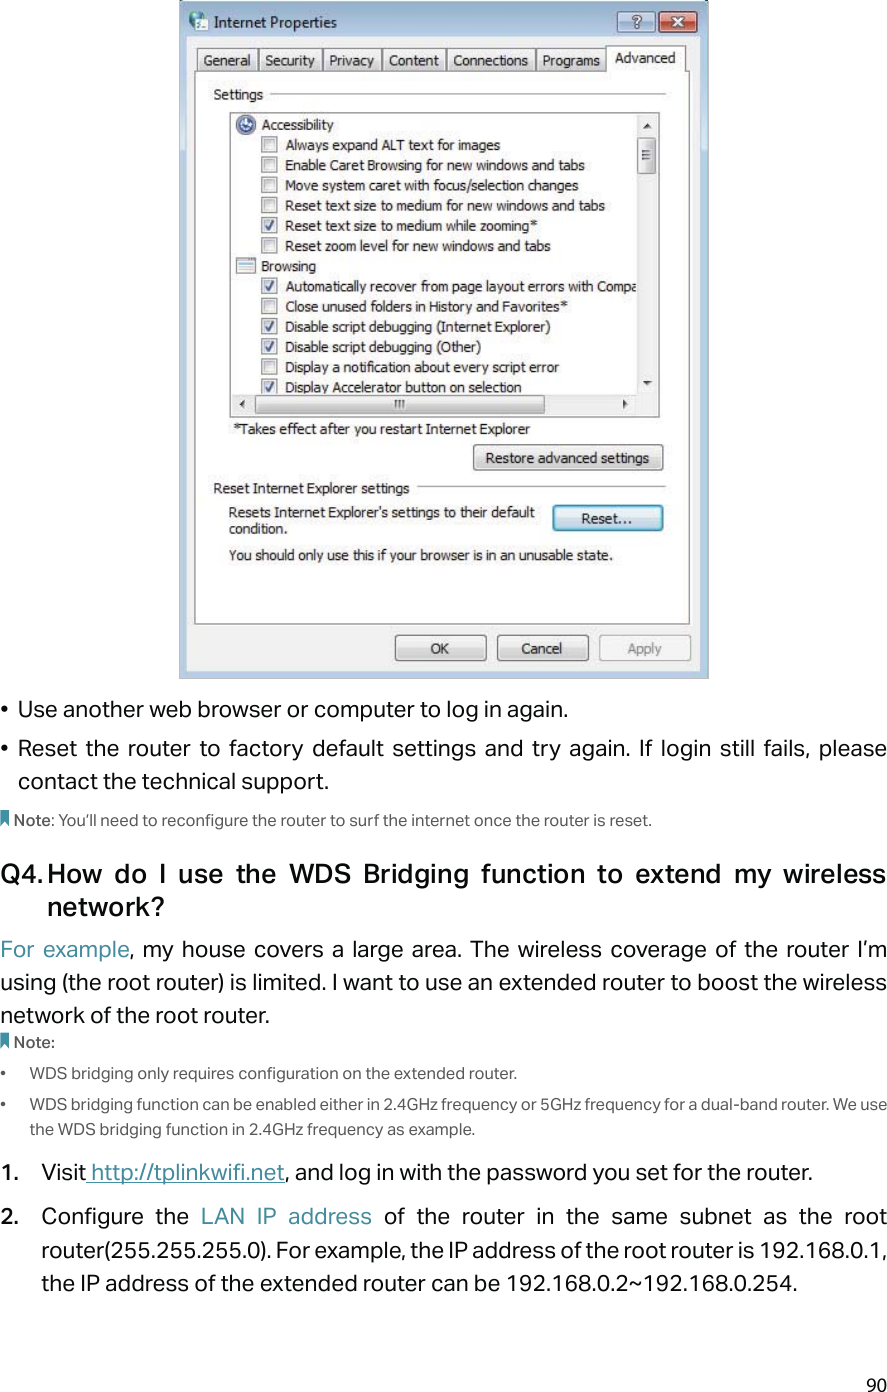 90•  Use another web browser or computer to log in again.• Reset the router to factory default settings and try again. If login still fails, please contact the technical support.Note: You’ll need to reconfigure the router to surf the internet once the router is reset.Q4. How do I use the WDS Bridging function to extend my wireless network?For example, my house covers a large area. The wireless coverage of the router I’m using (the root router) is limited. I want to use an extended router to boost the wireless network of the root router.Note:•  WDS bridging only requires configuration on the extended router.•  WDS bridging function can be enabled either in 2.4GHz frequency or 5GHz frequency for a dual-band router. We use the WDS bridging function in 2.4GHz frequency as example.1.  Visit http://tplinkwifi.net, and log in with the password you set for the router.2.  Configure the LAN IP address of the router in the same subnet as the root router(255.255.255.0). For example, the IP address of the root router is 192.168.0.1, the IP address of the extended router can be 192.168.0.2~192.168.0.254.